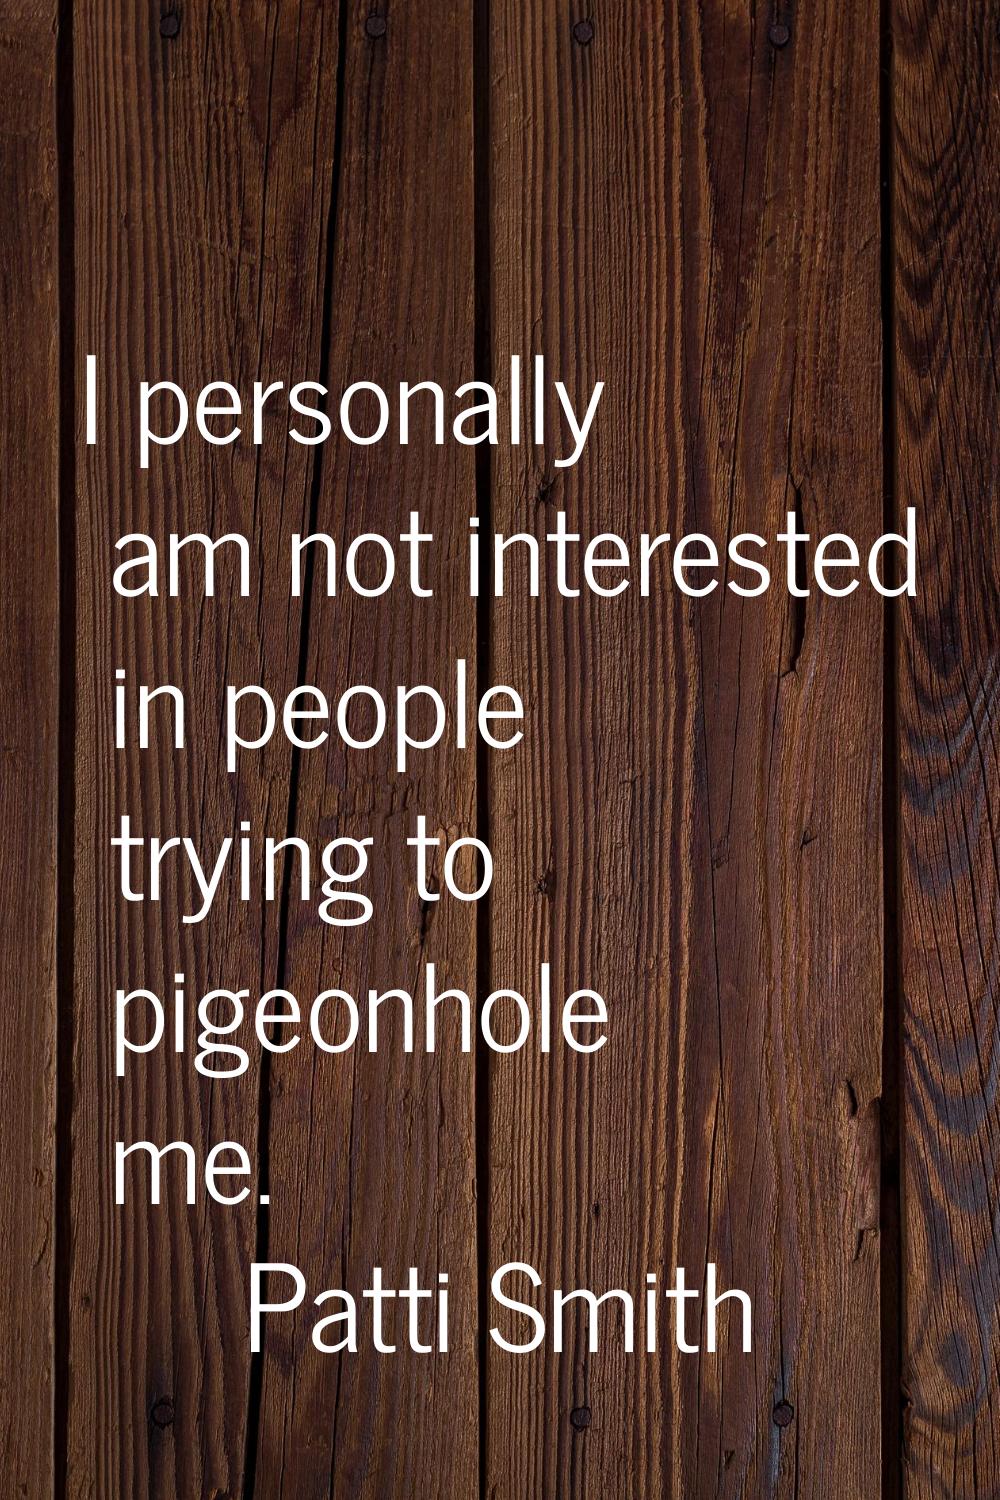 I personally am not interested in people trying to pigeonhole me.